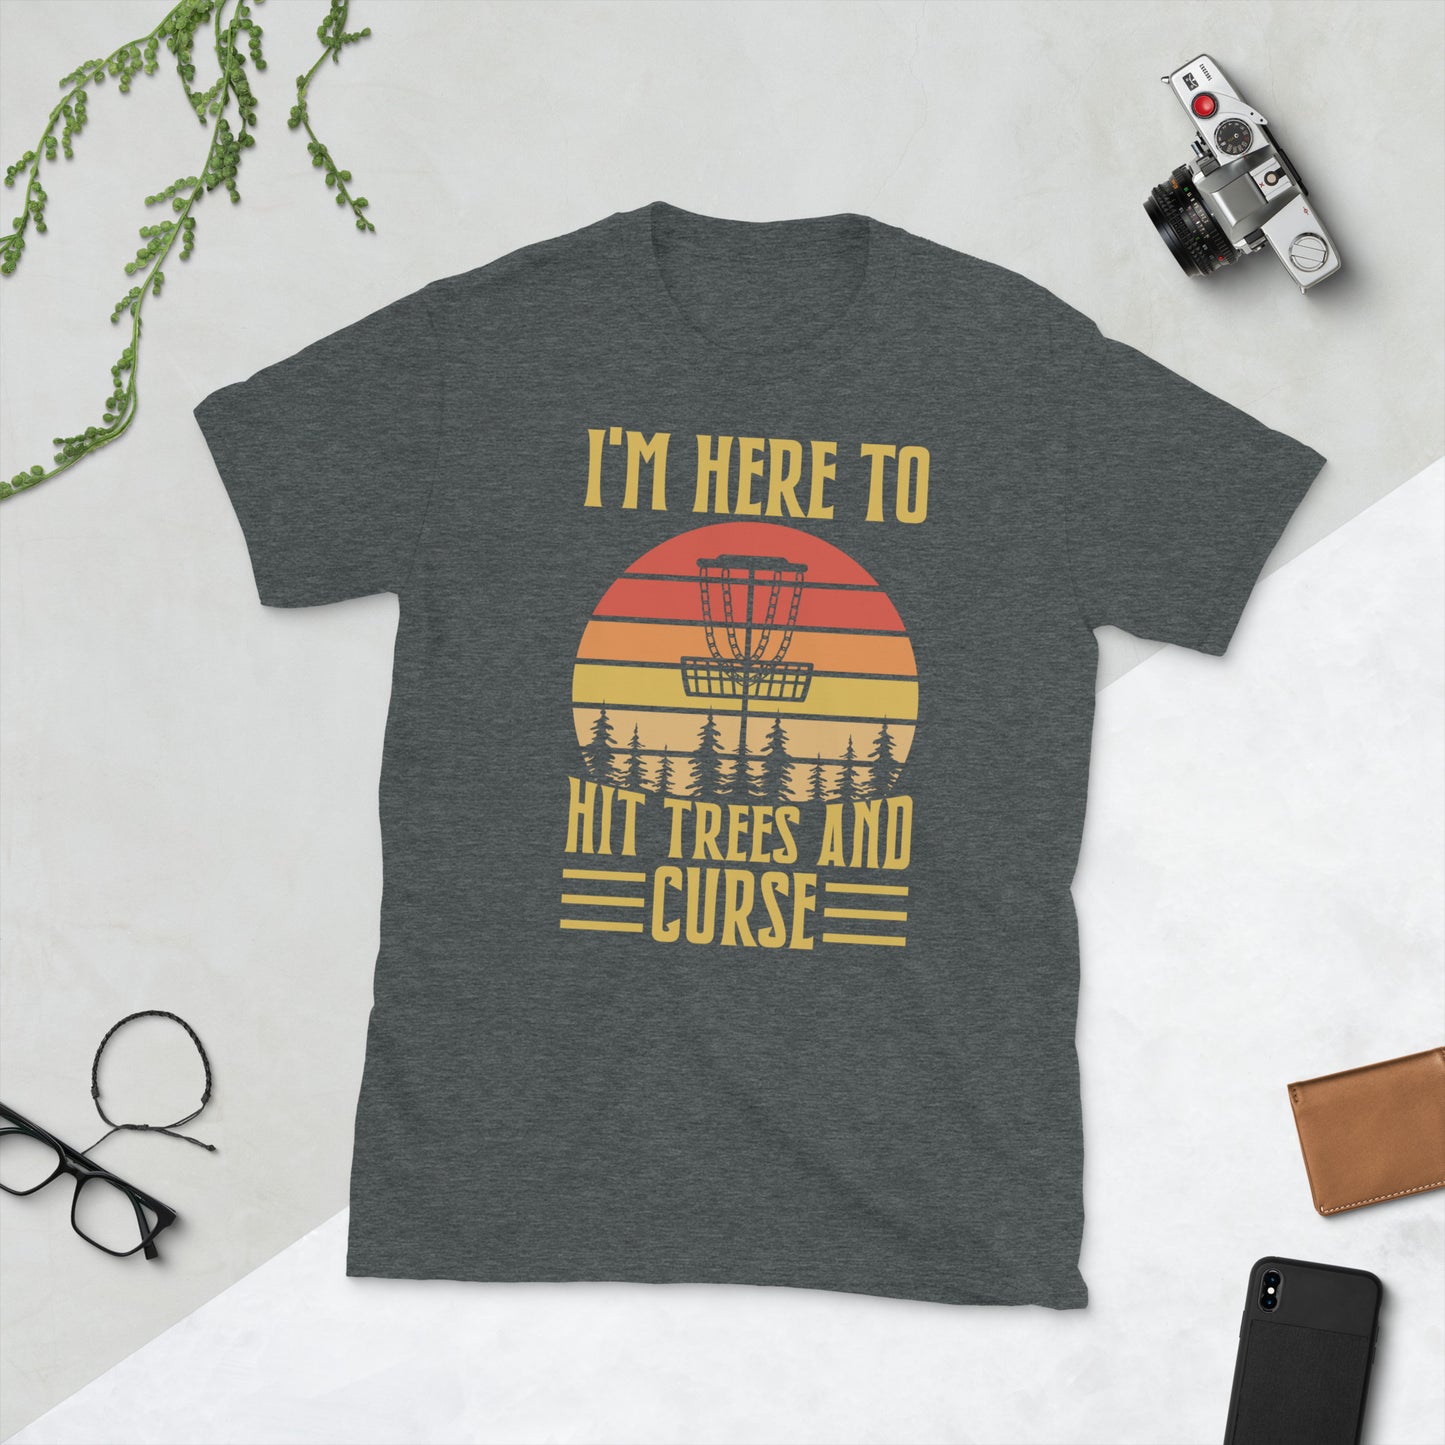 Disc Golf I'm Here To Hit Trees And Curse Tshirt | Disc Sport Shirt | Disc Golf Gifts | Disc Golf Unisex T-Shirt